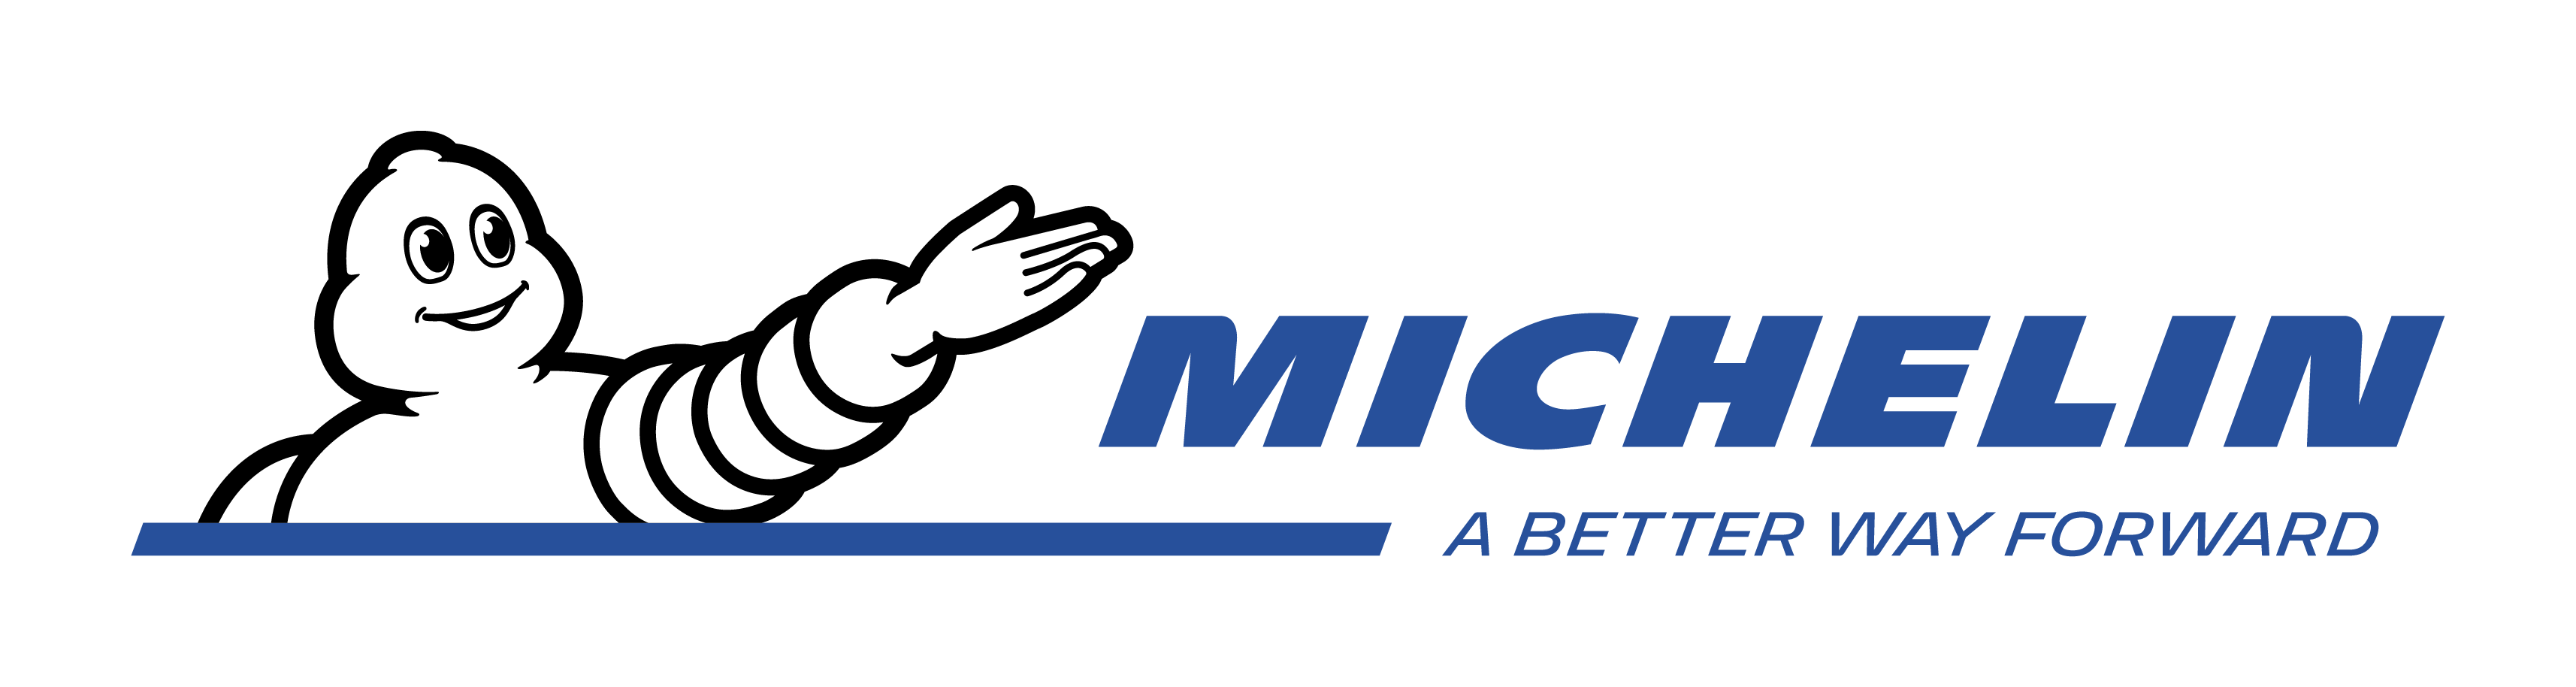 Michelin   A Better Way Forward Michelin   A Better Way Forward Pluspng Pluspng.com - Way Forward, Transparent background PNG HD thumbnail